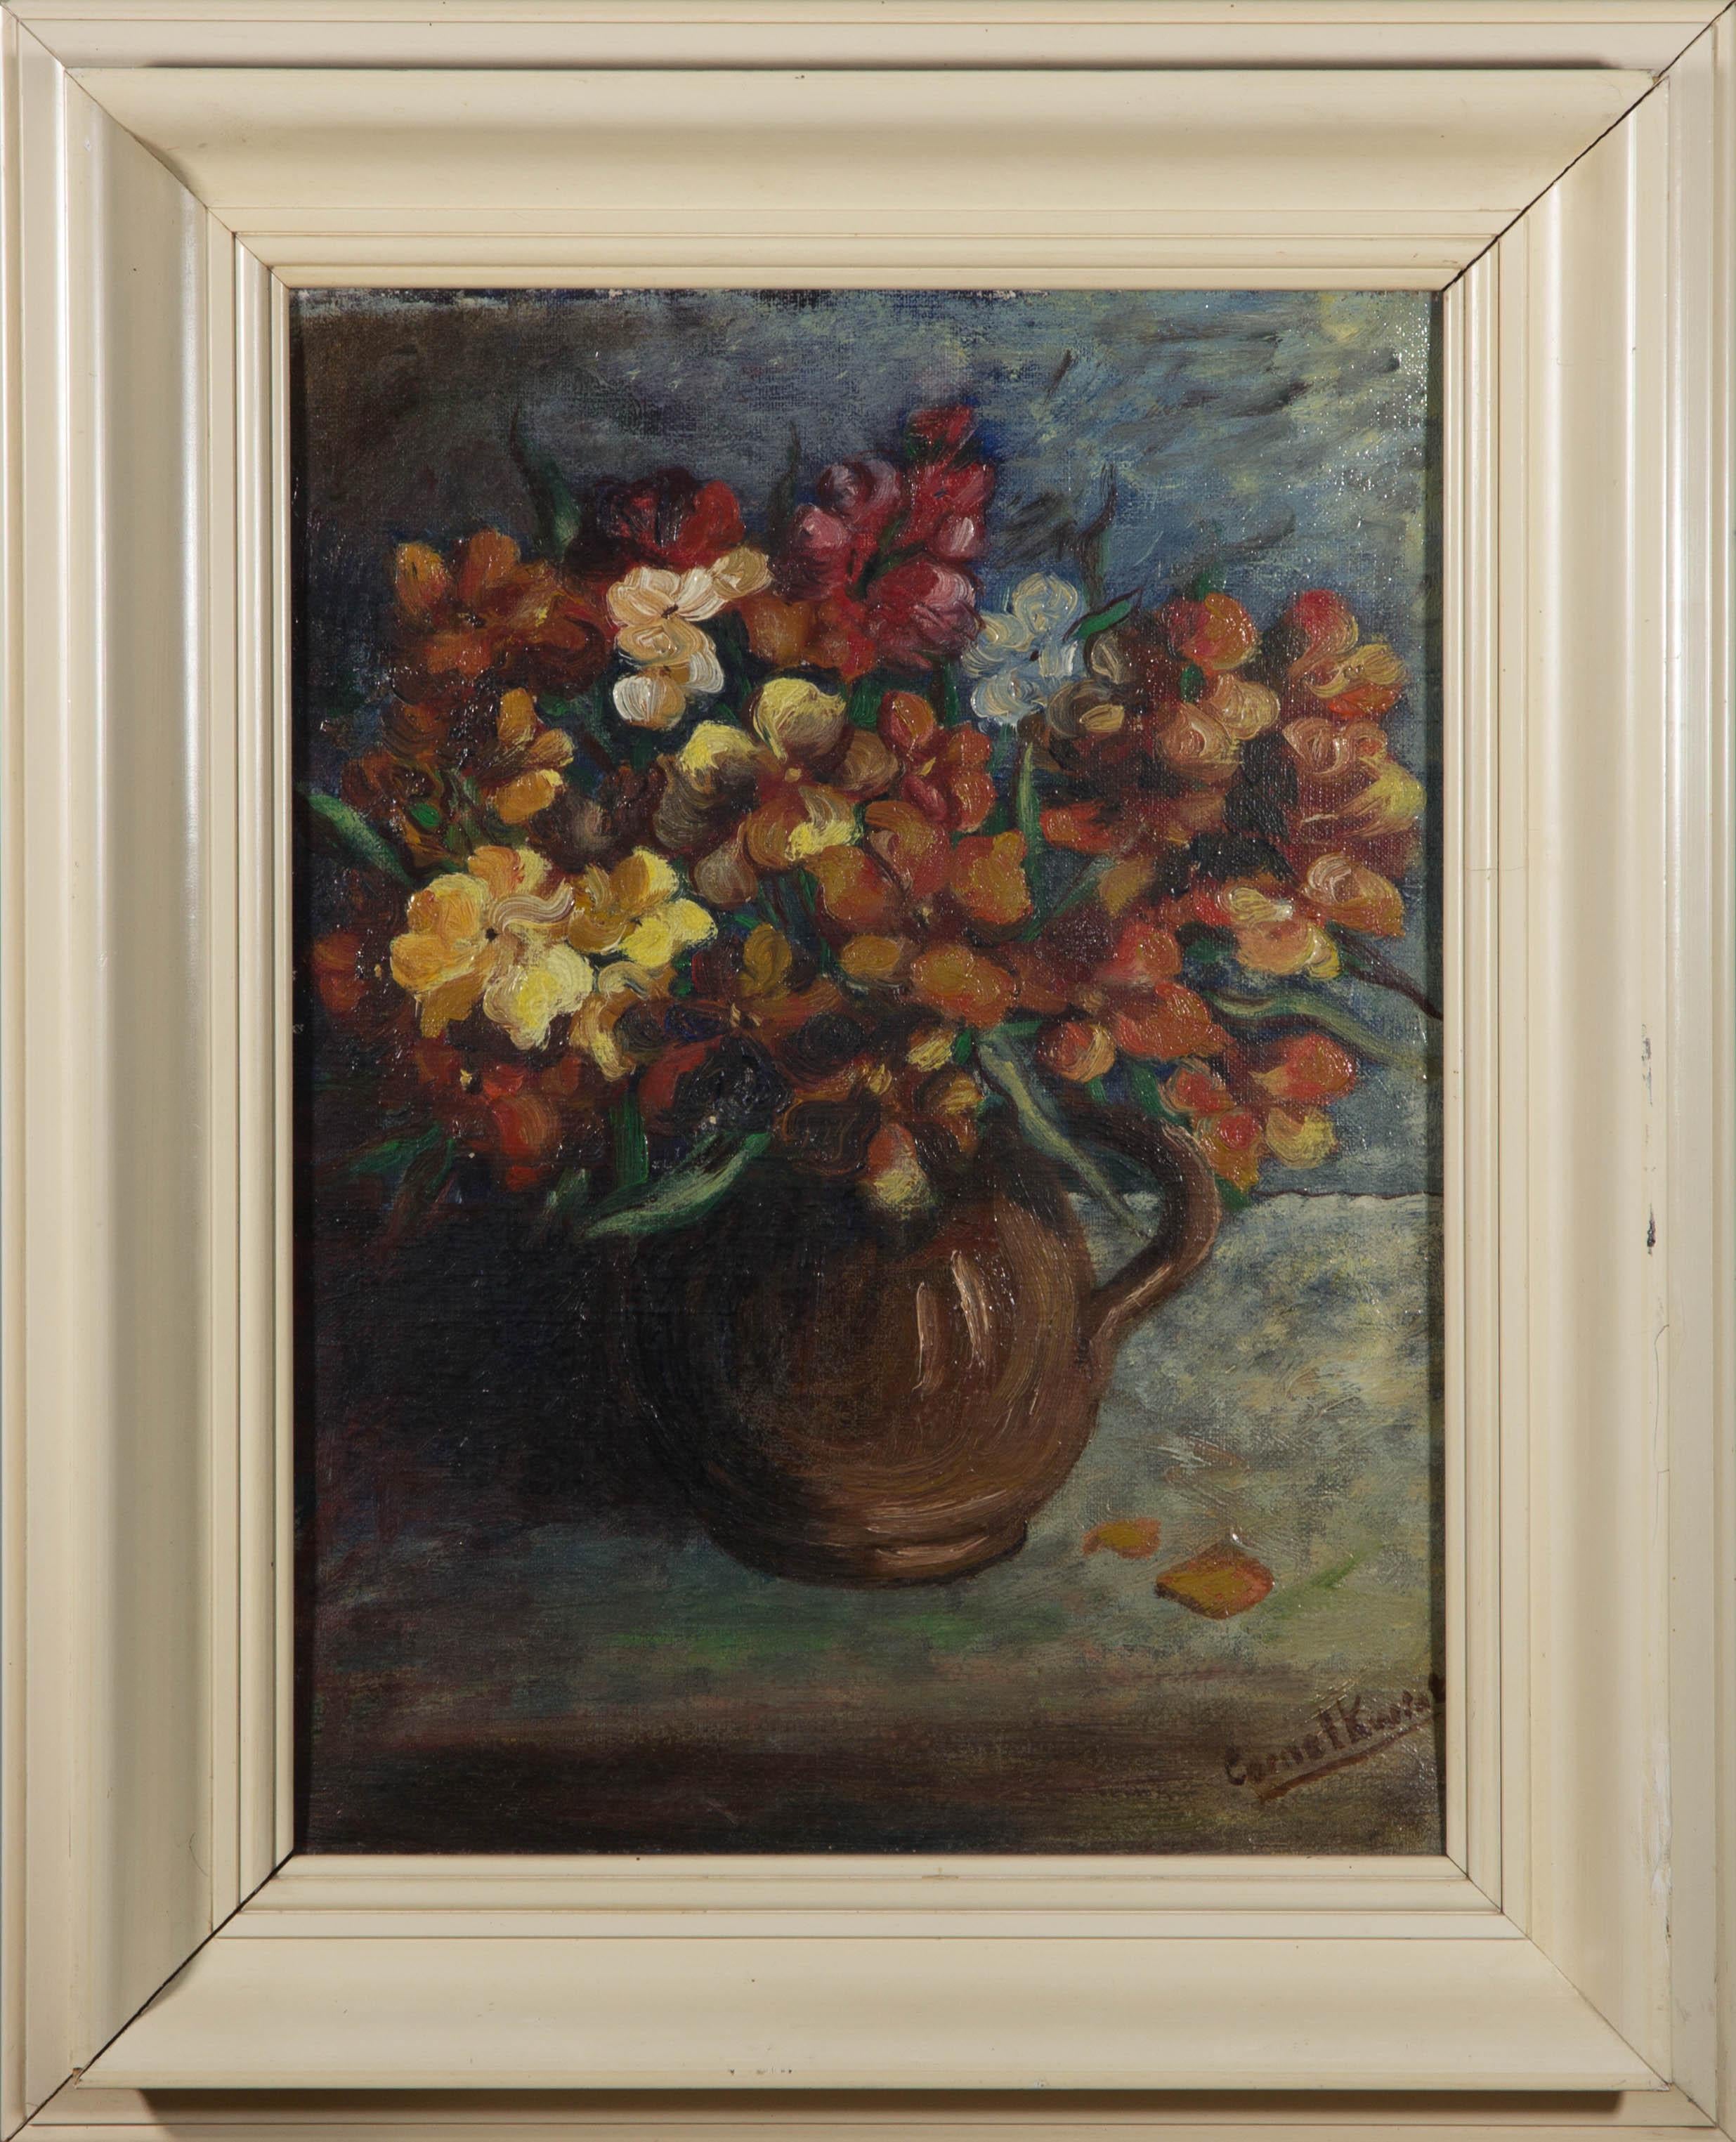 Fluid impasto brush marks and an autumnal palette are combined to describe a vase of flowers in a dimly lit interior.

Signed in the bottom right-hand corner and inscribed on the reverse.

Well presented in a molded white wood frame.

On canvas on